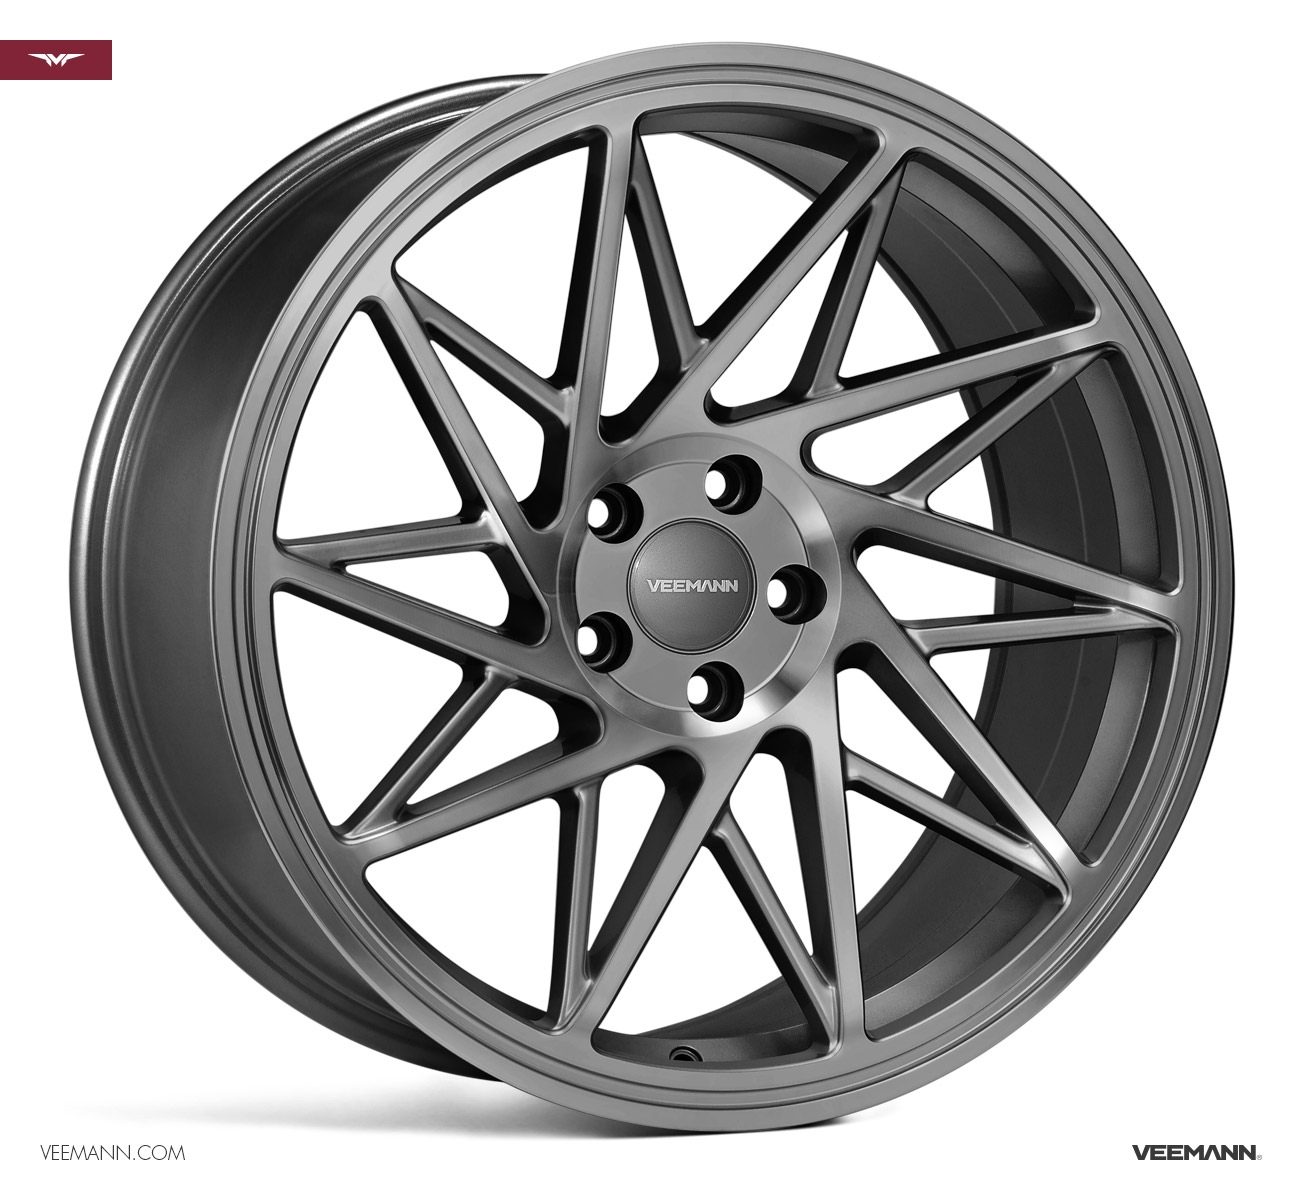 NEW 19" VEEMANN V-FS35 ALLOY WHEELS IN GLOSS GRAPHITE WITH WIDER 9.5" REARS